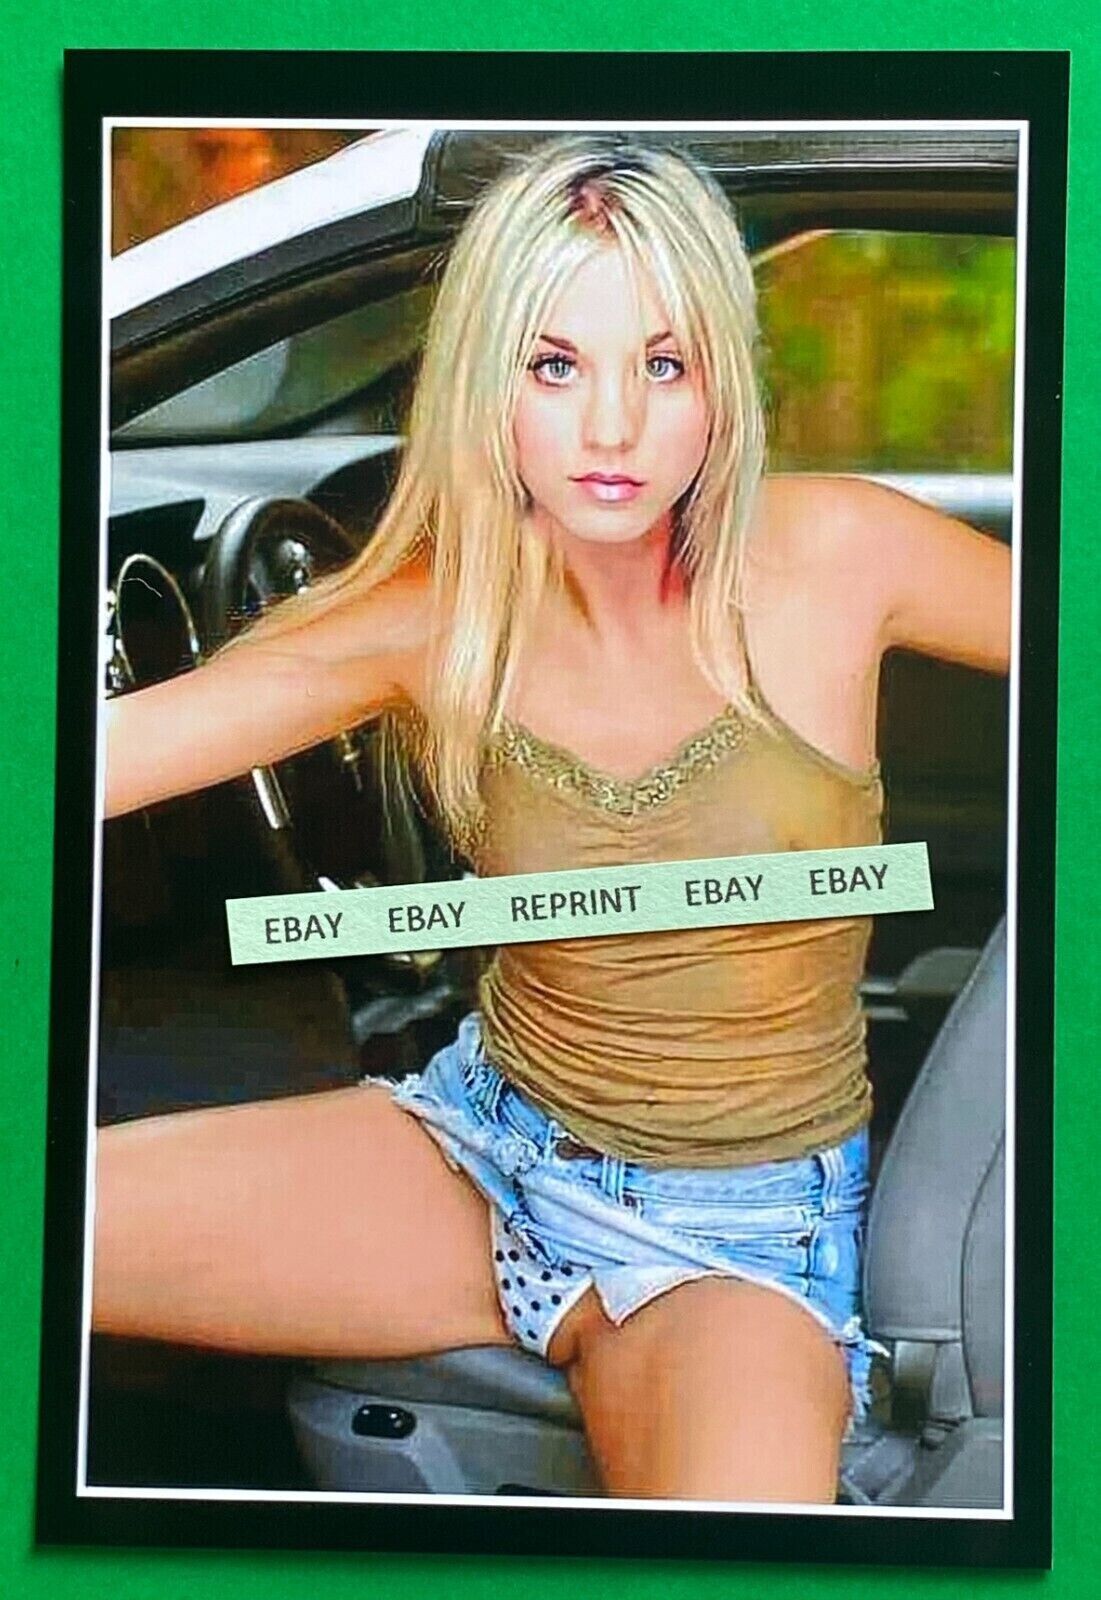 Found 4X6 PHOTO of Beautiful Actor Kaley Cuoco in Wet T Big Bang Theory TV Show